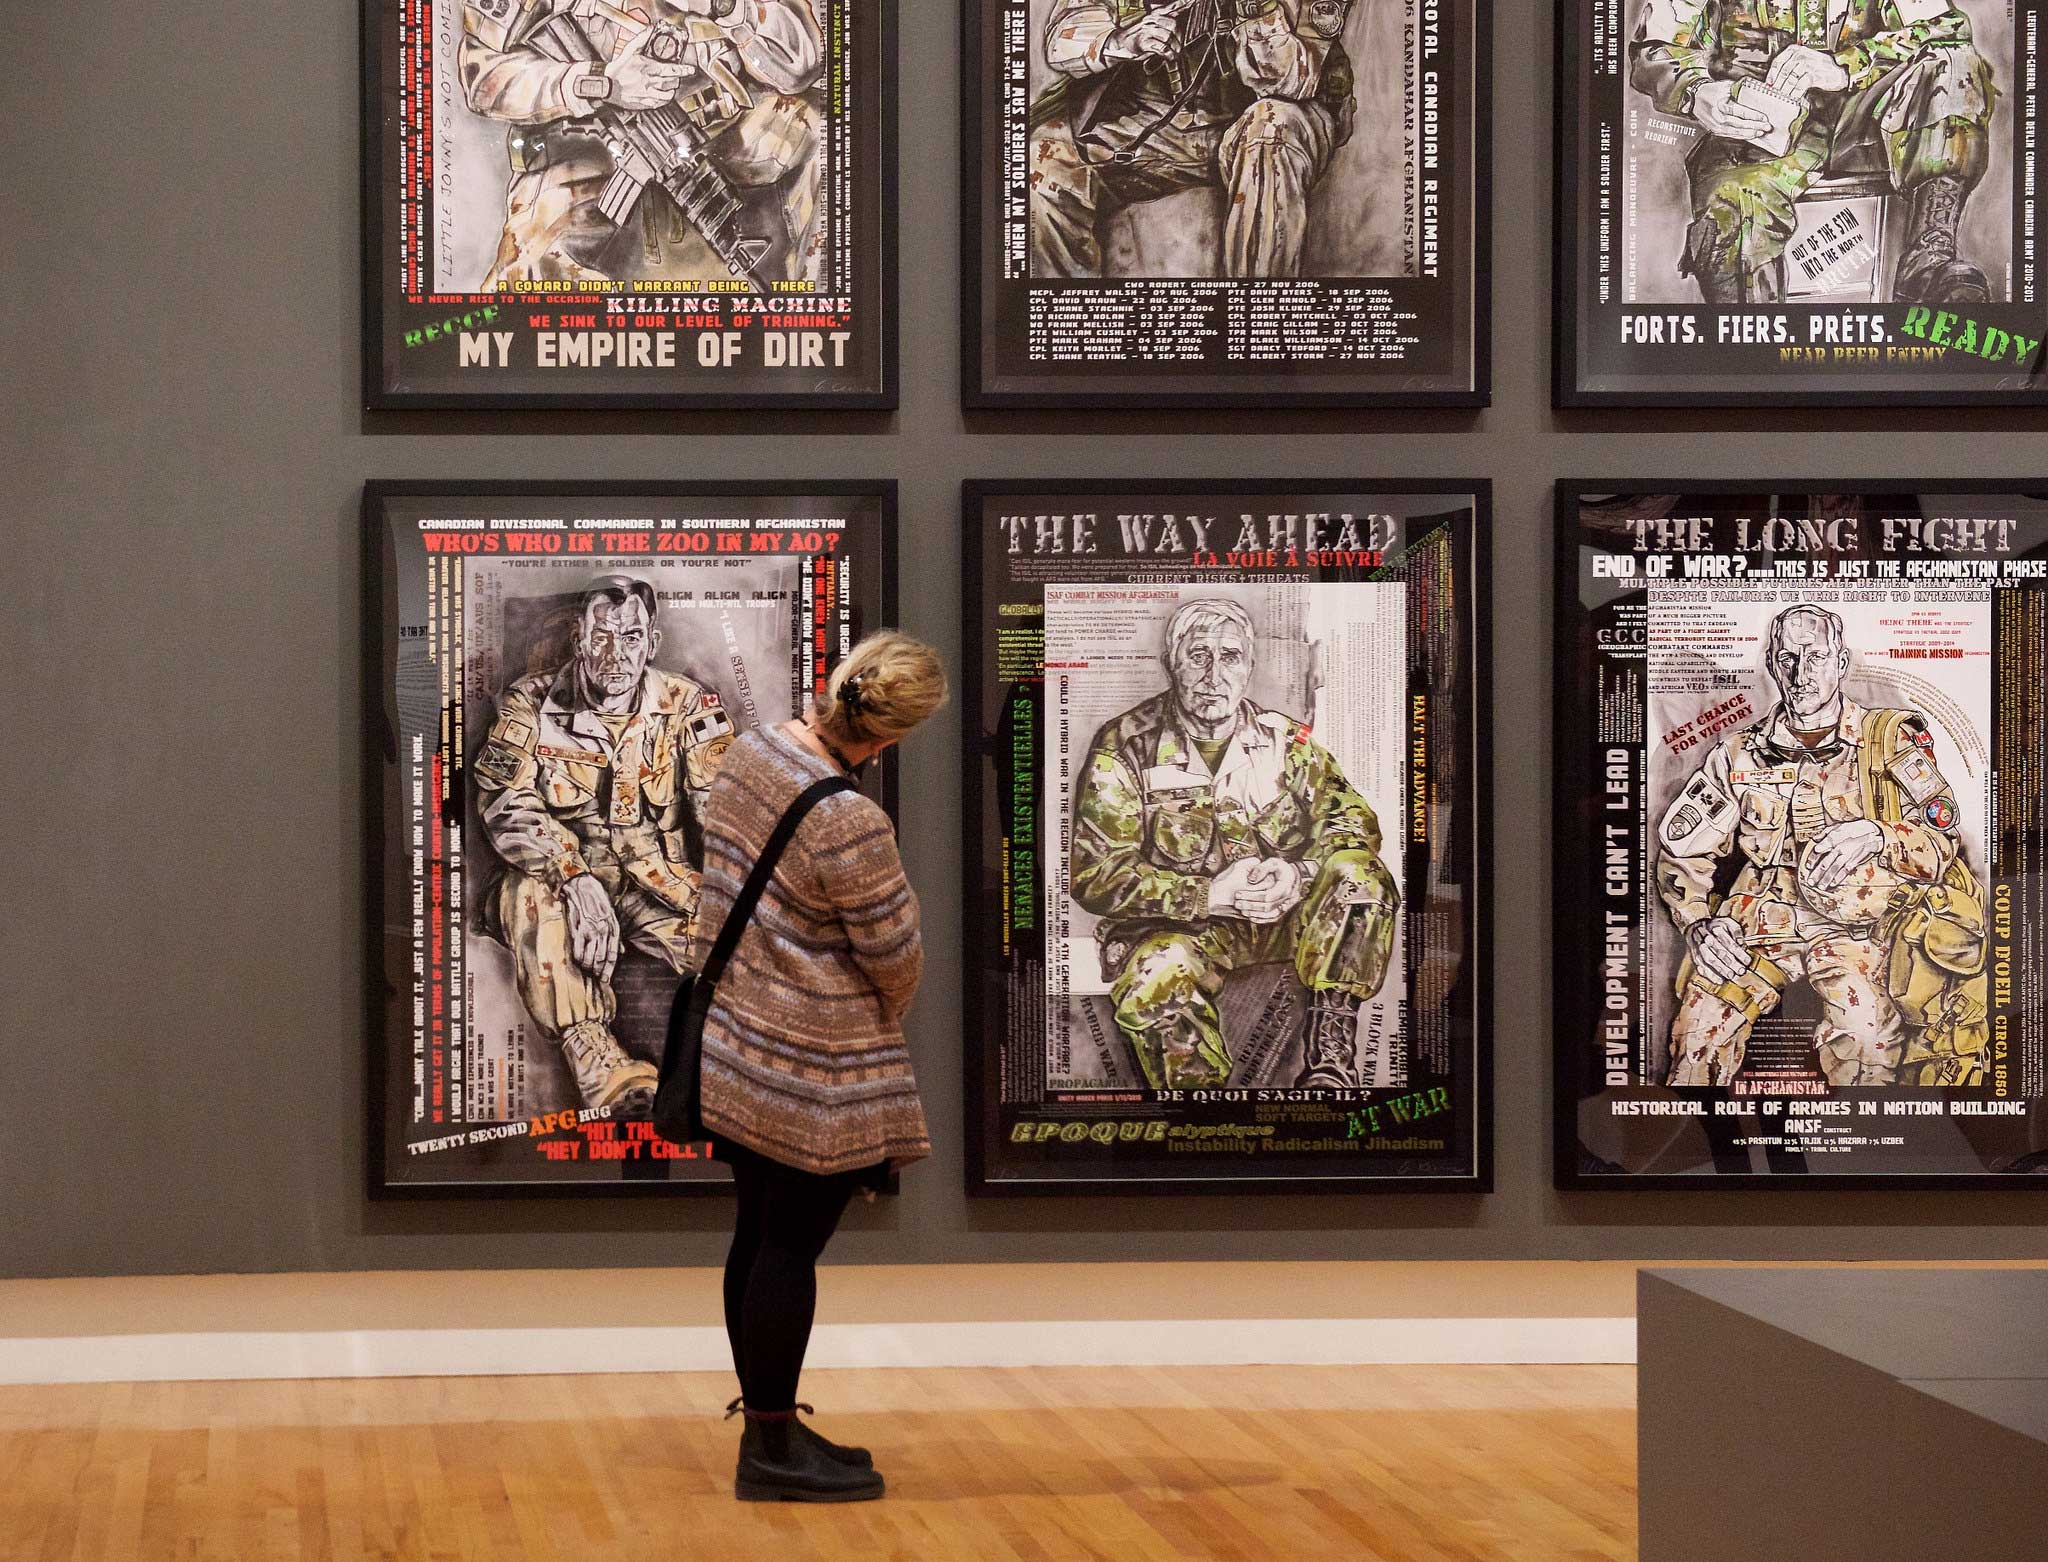 The Art of Command: Portraits and Posters from Canada’s Afghan Mission